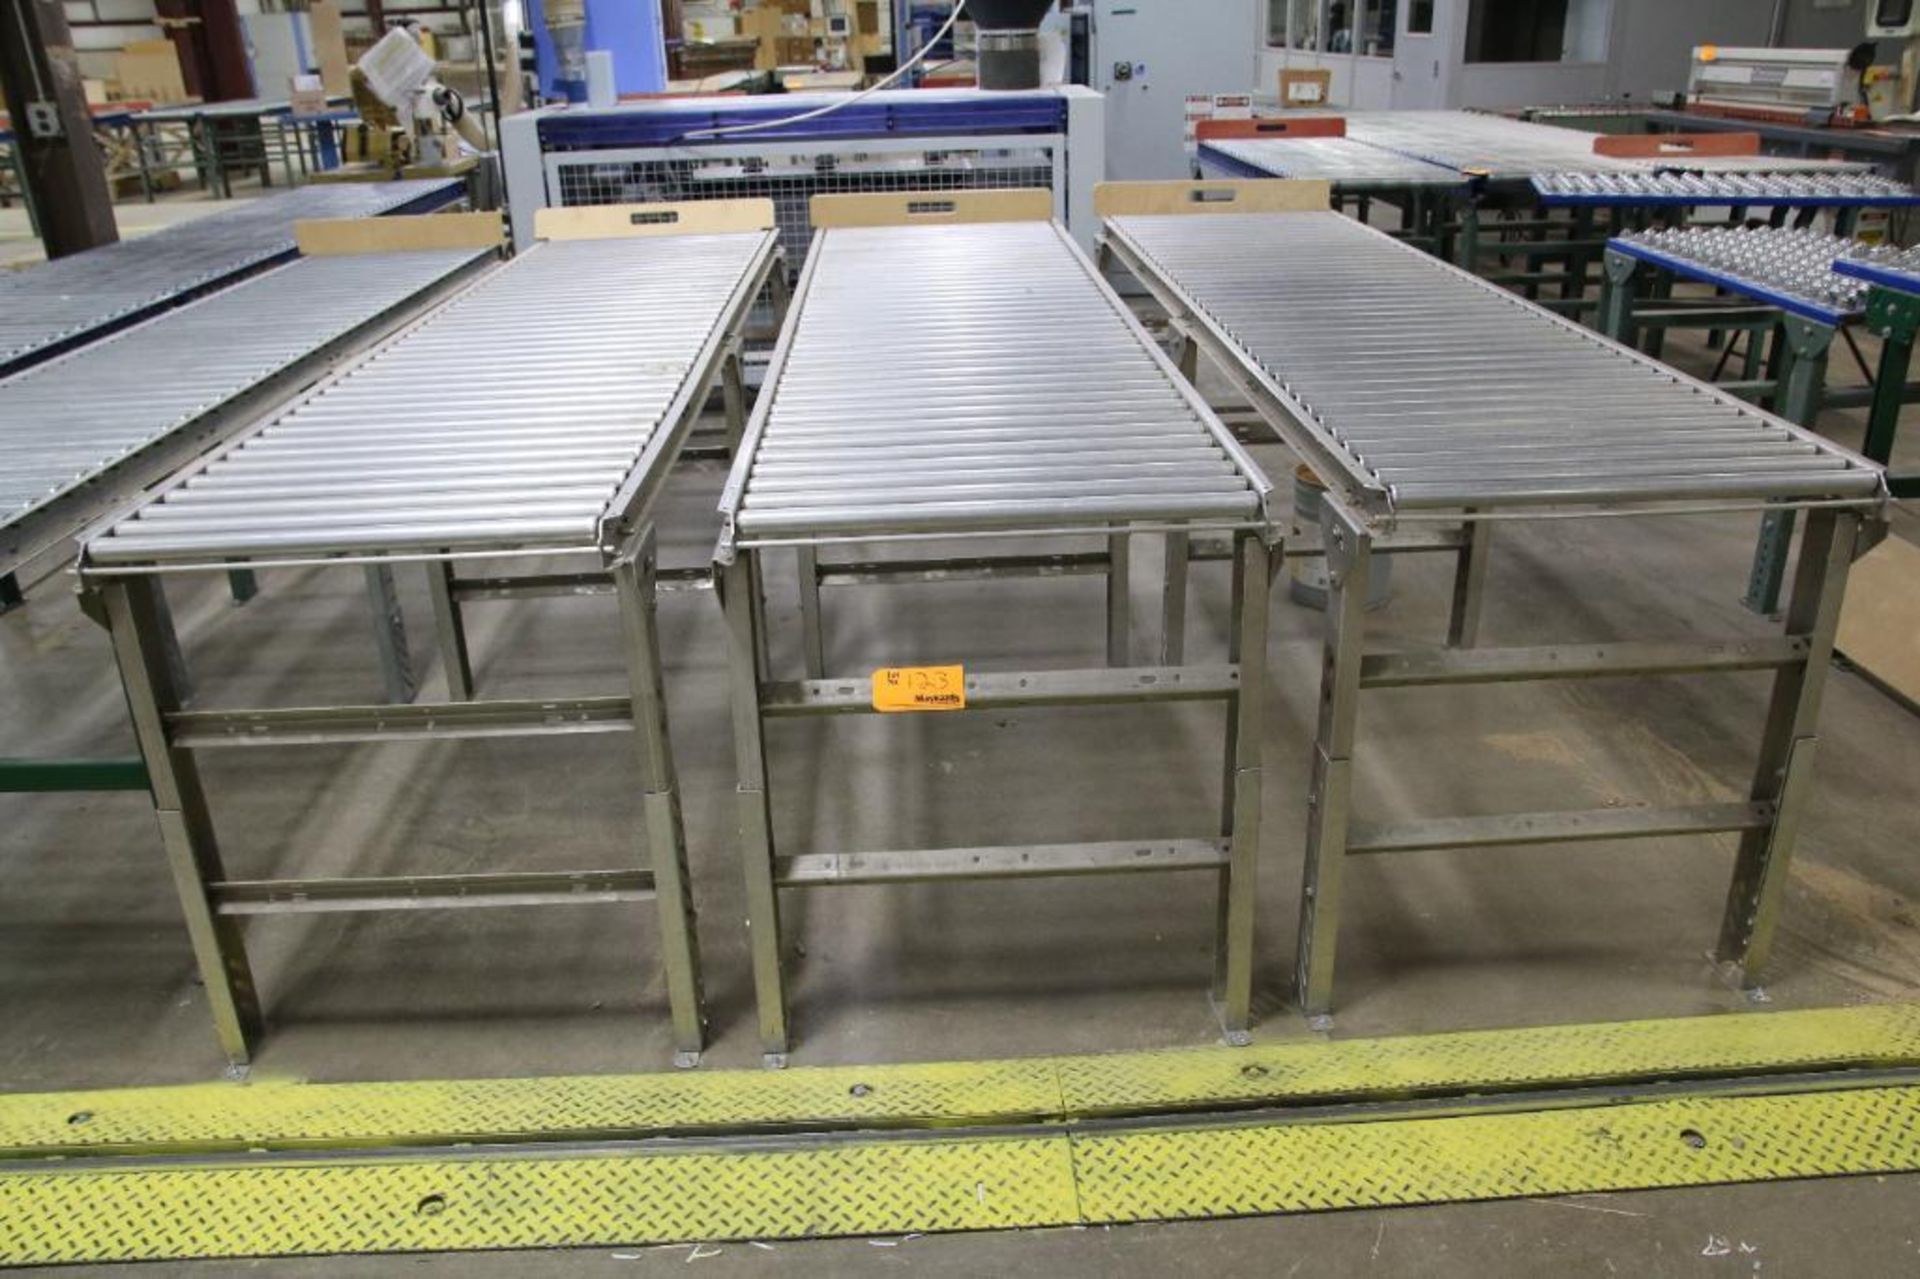 LOT: (3) Roller Conveyor Lines, All Three are 120" x 30" x 36" High